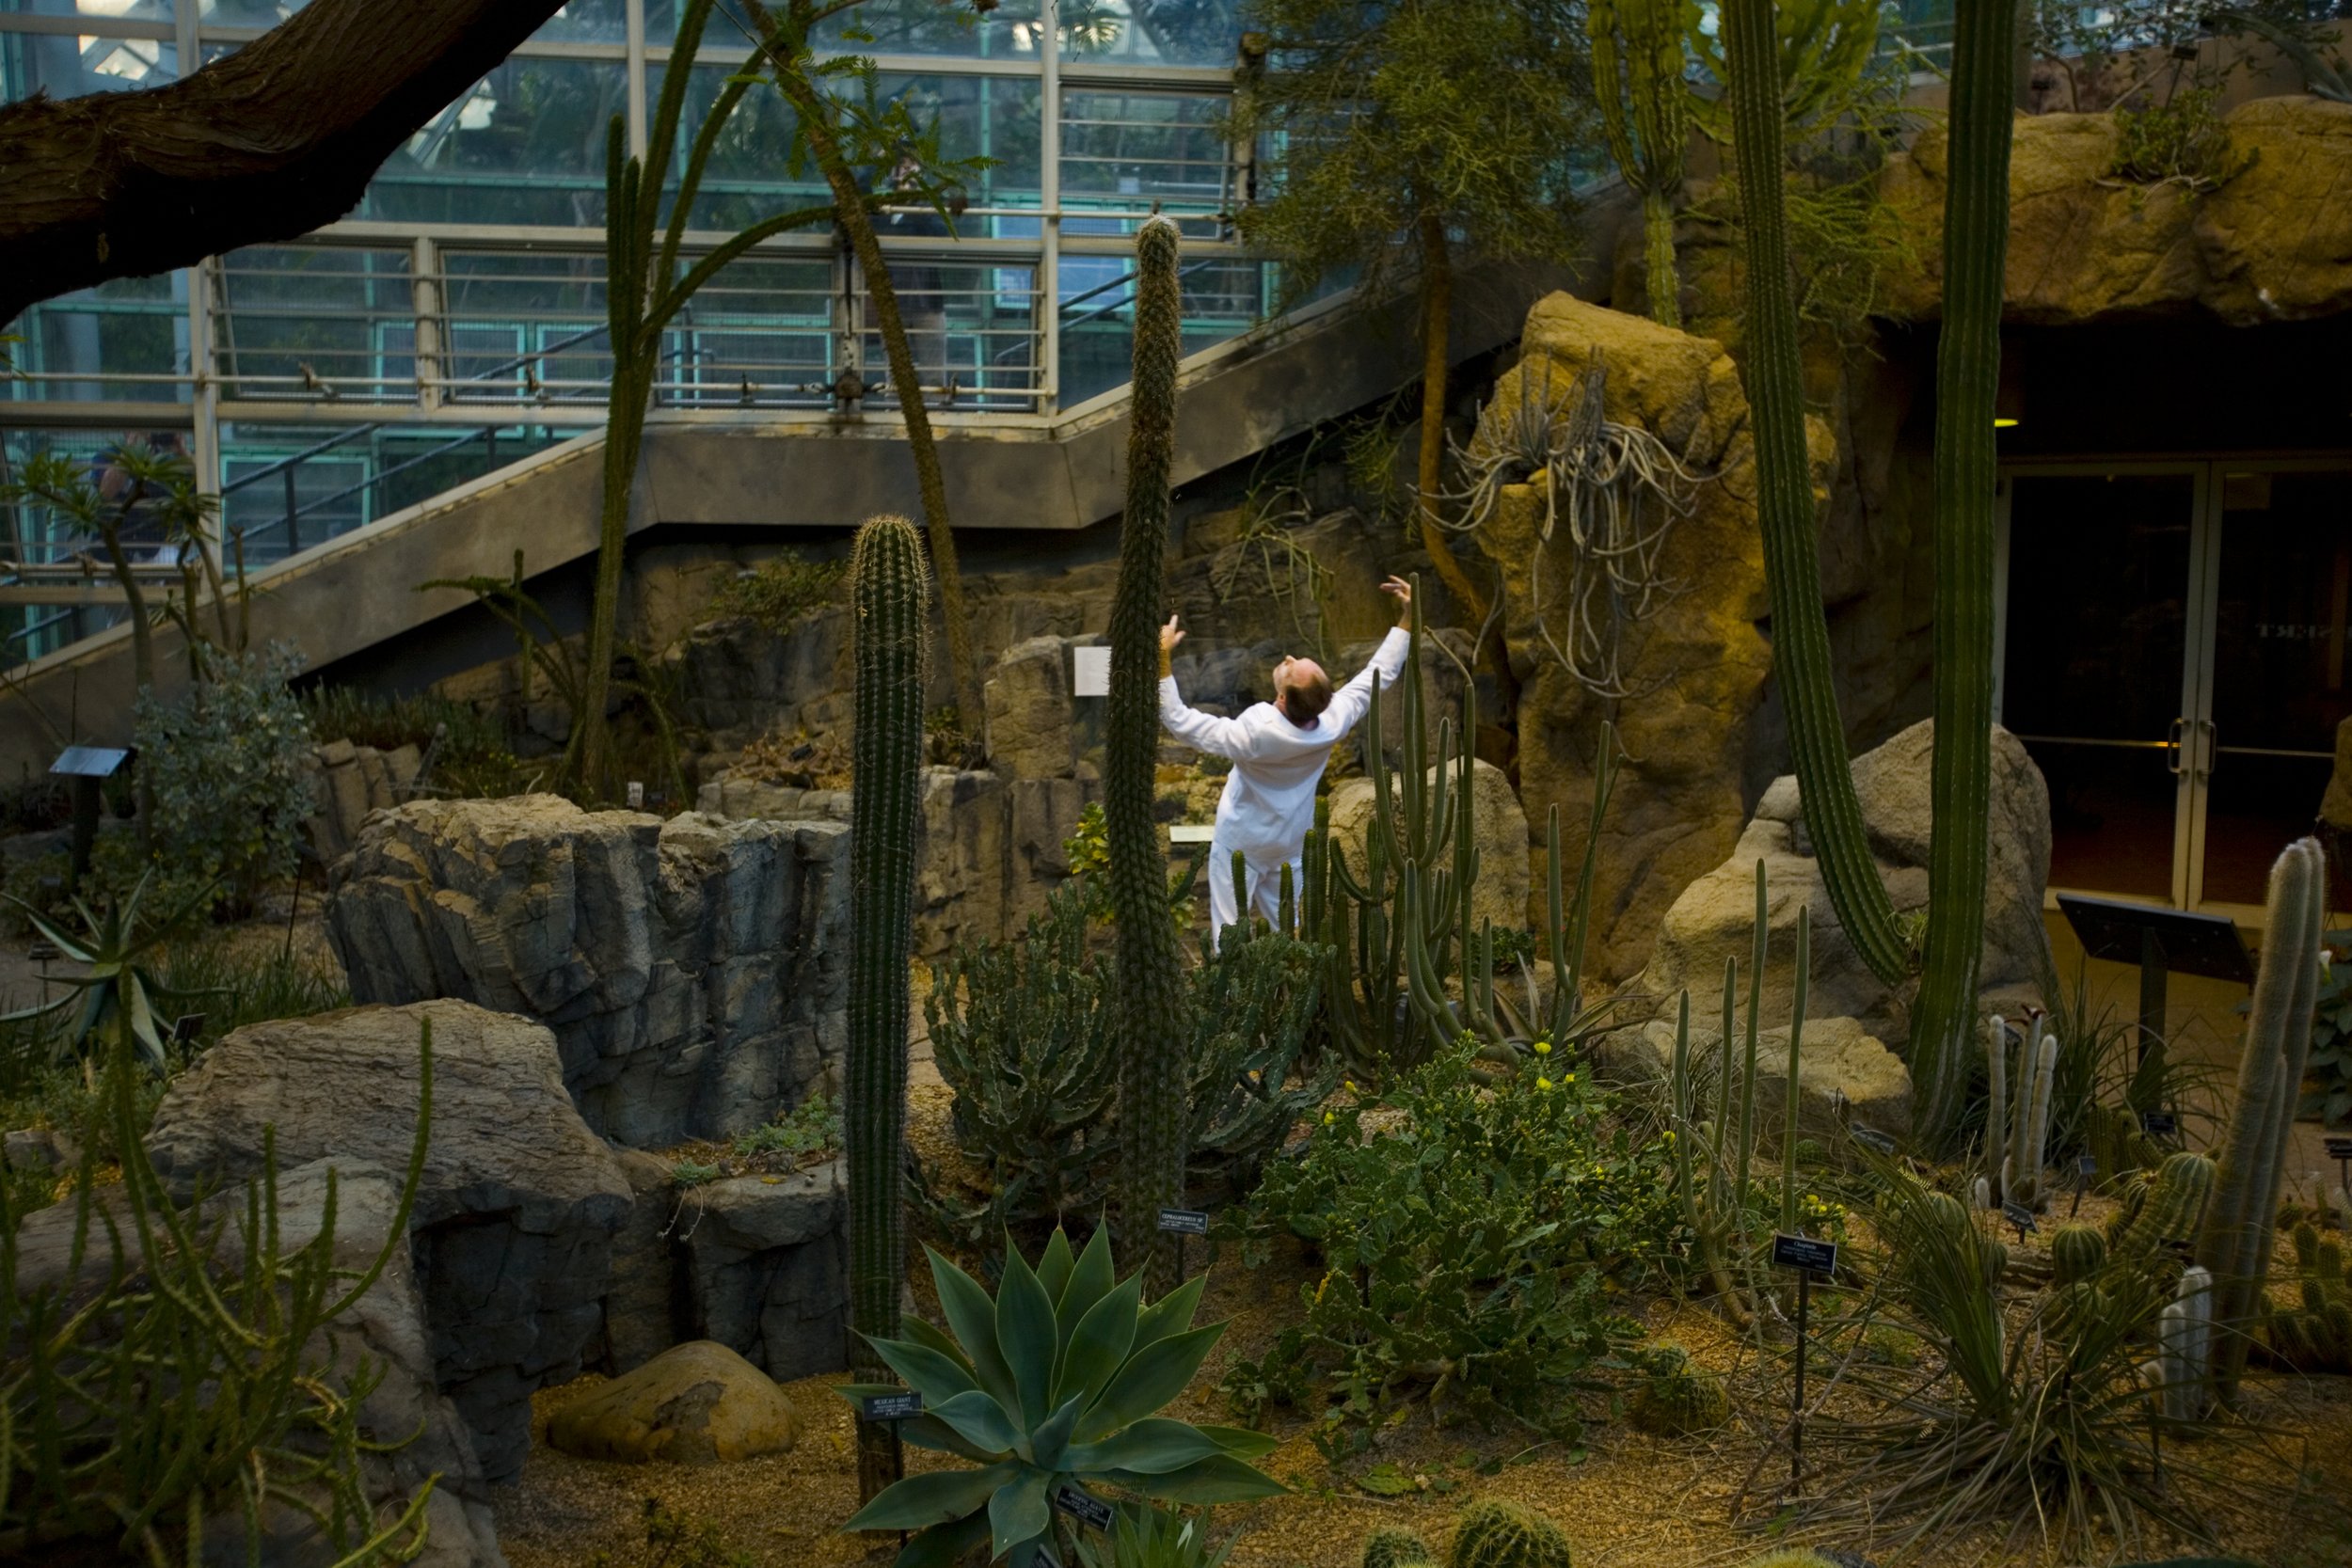 A performer in a white suit opens his arms to the sky inside of a cactus garden glass atrium. Photo by Kevin Kwan.